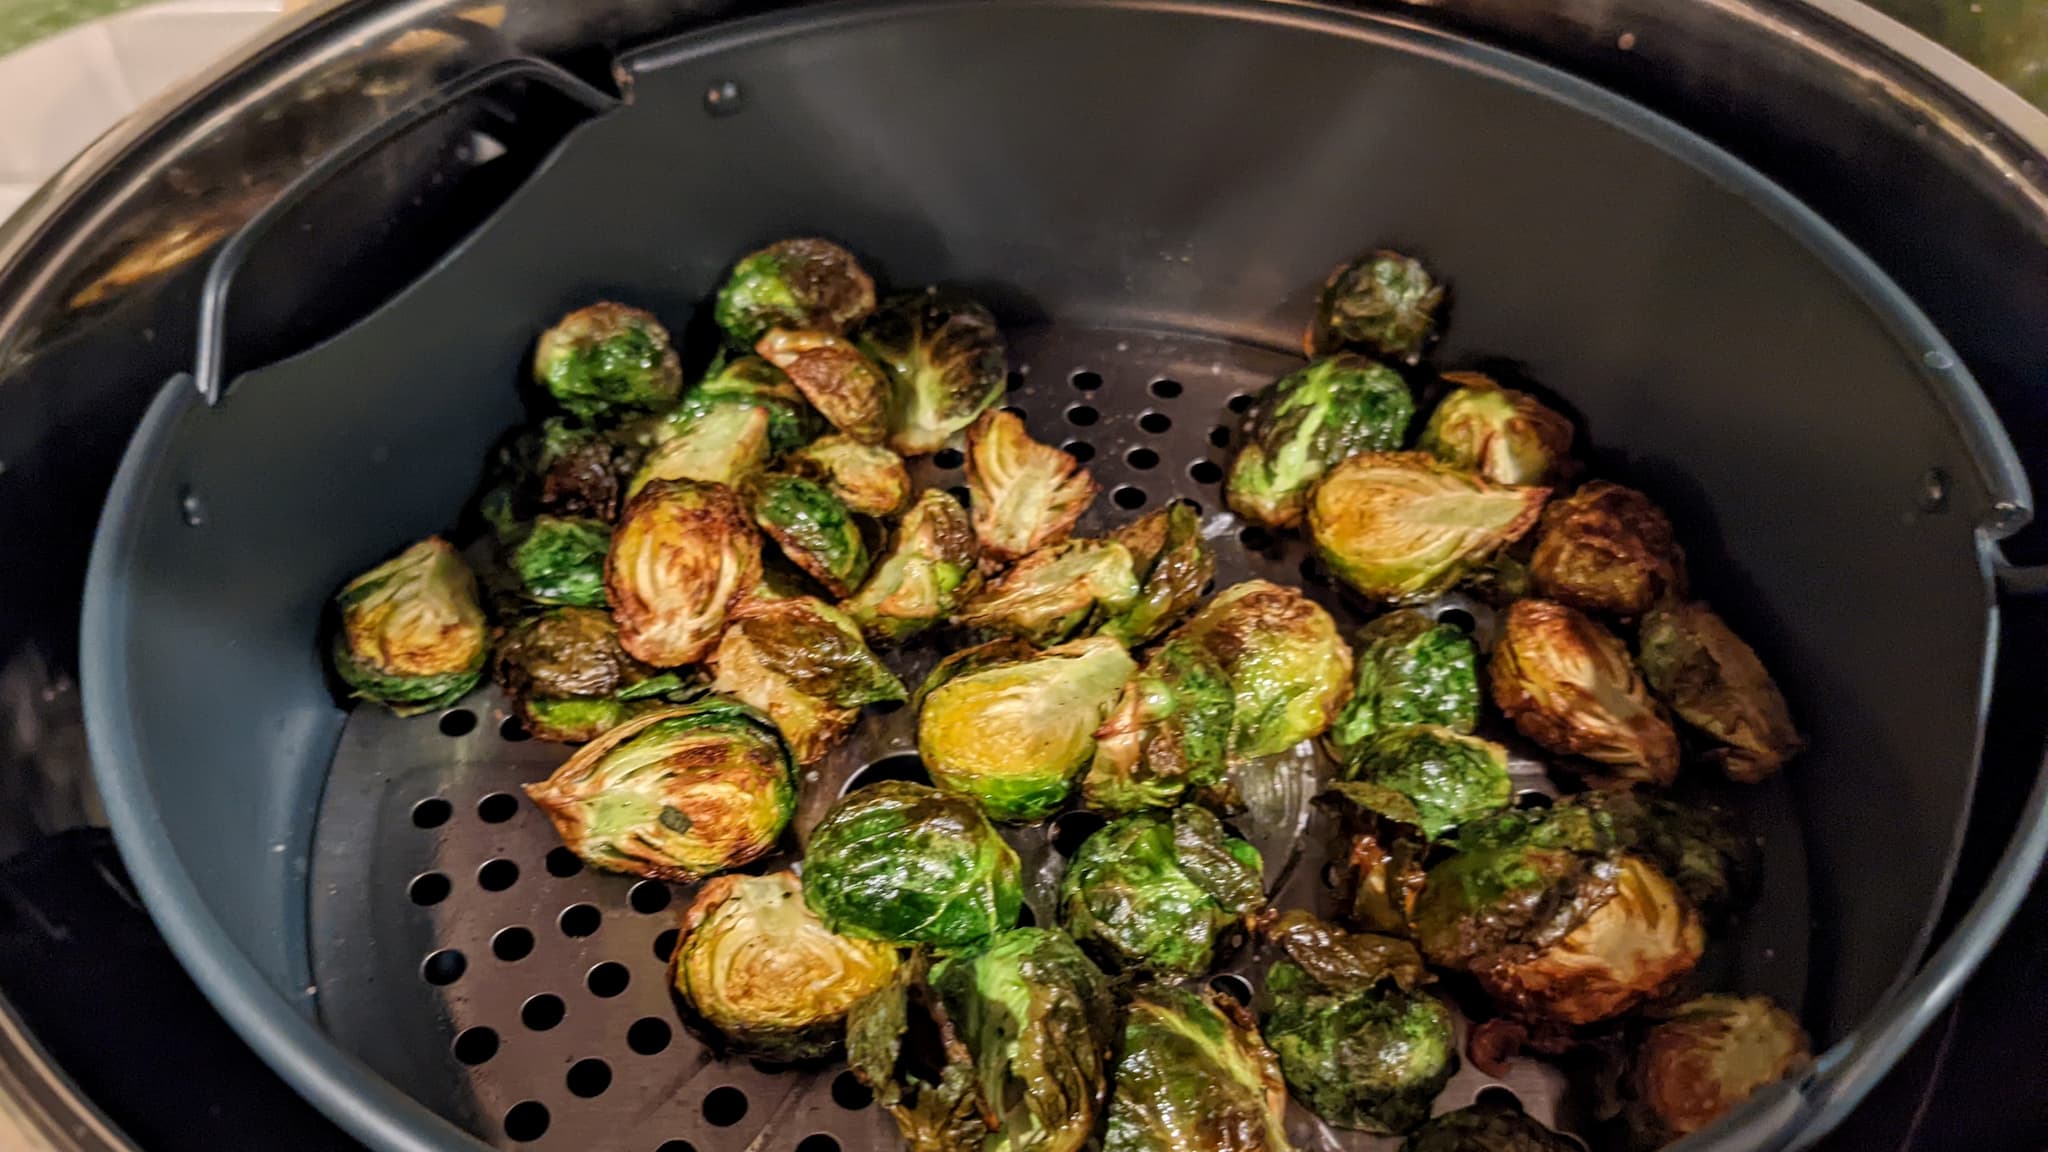 brussel sprouts in an air fryer.